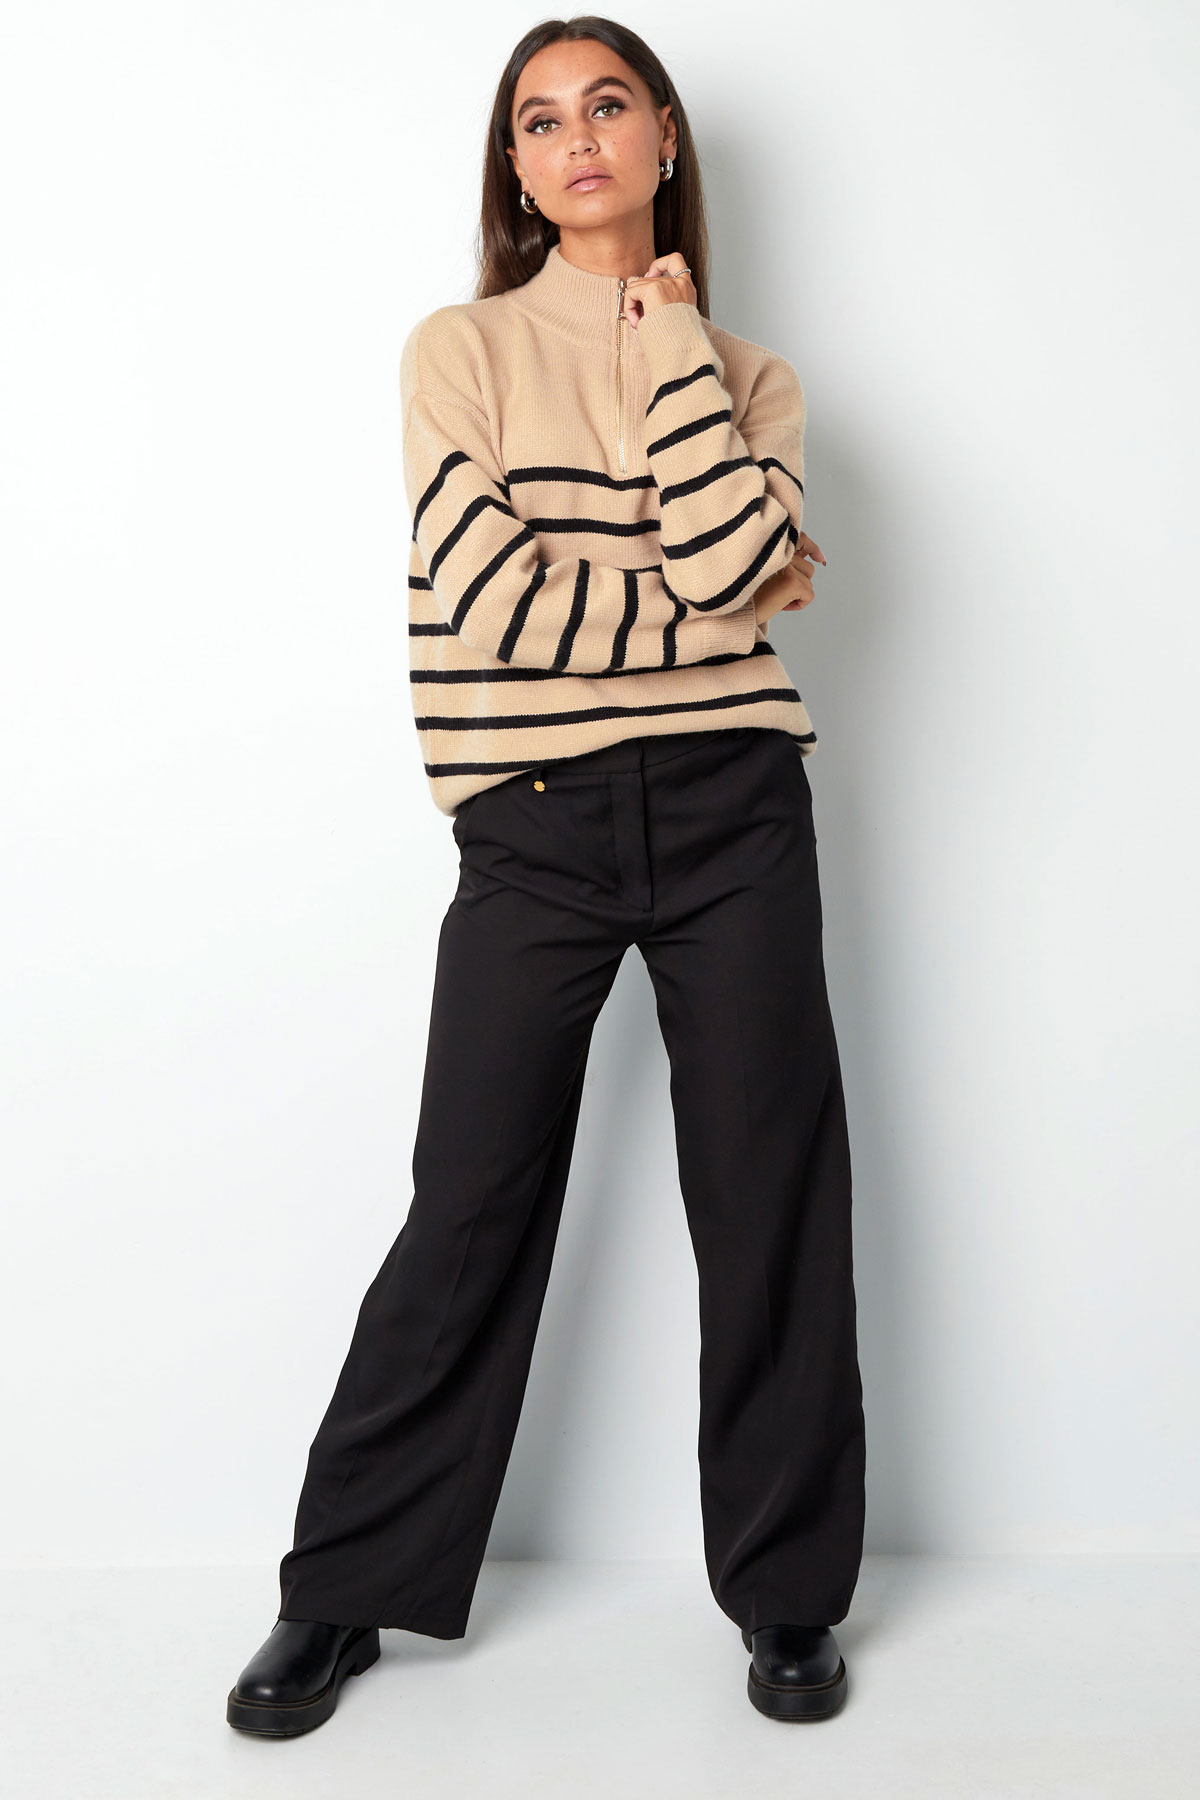 Knitted sweater stripes with zipper - black beige - SM h5 Picture8